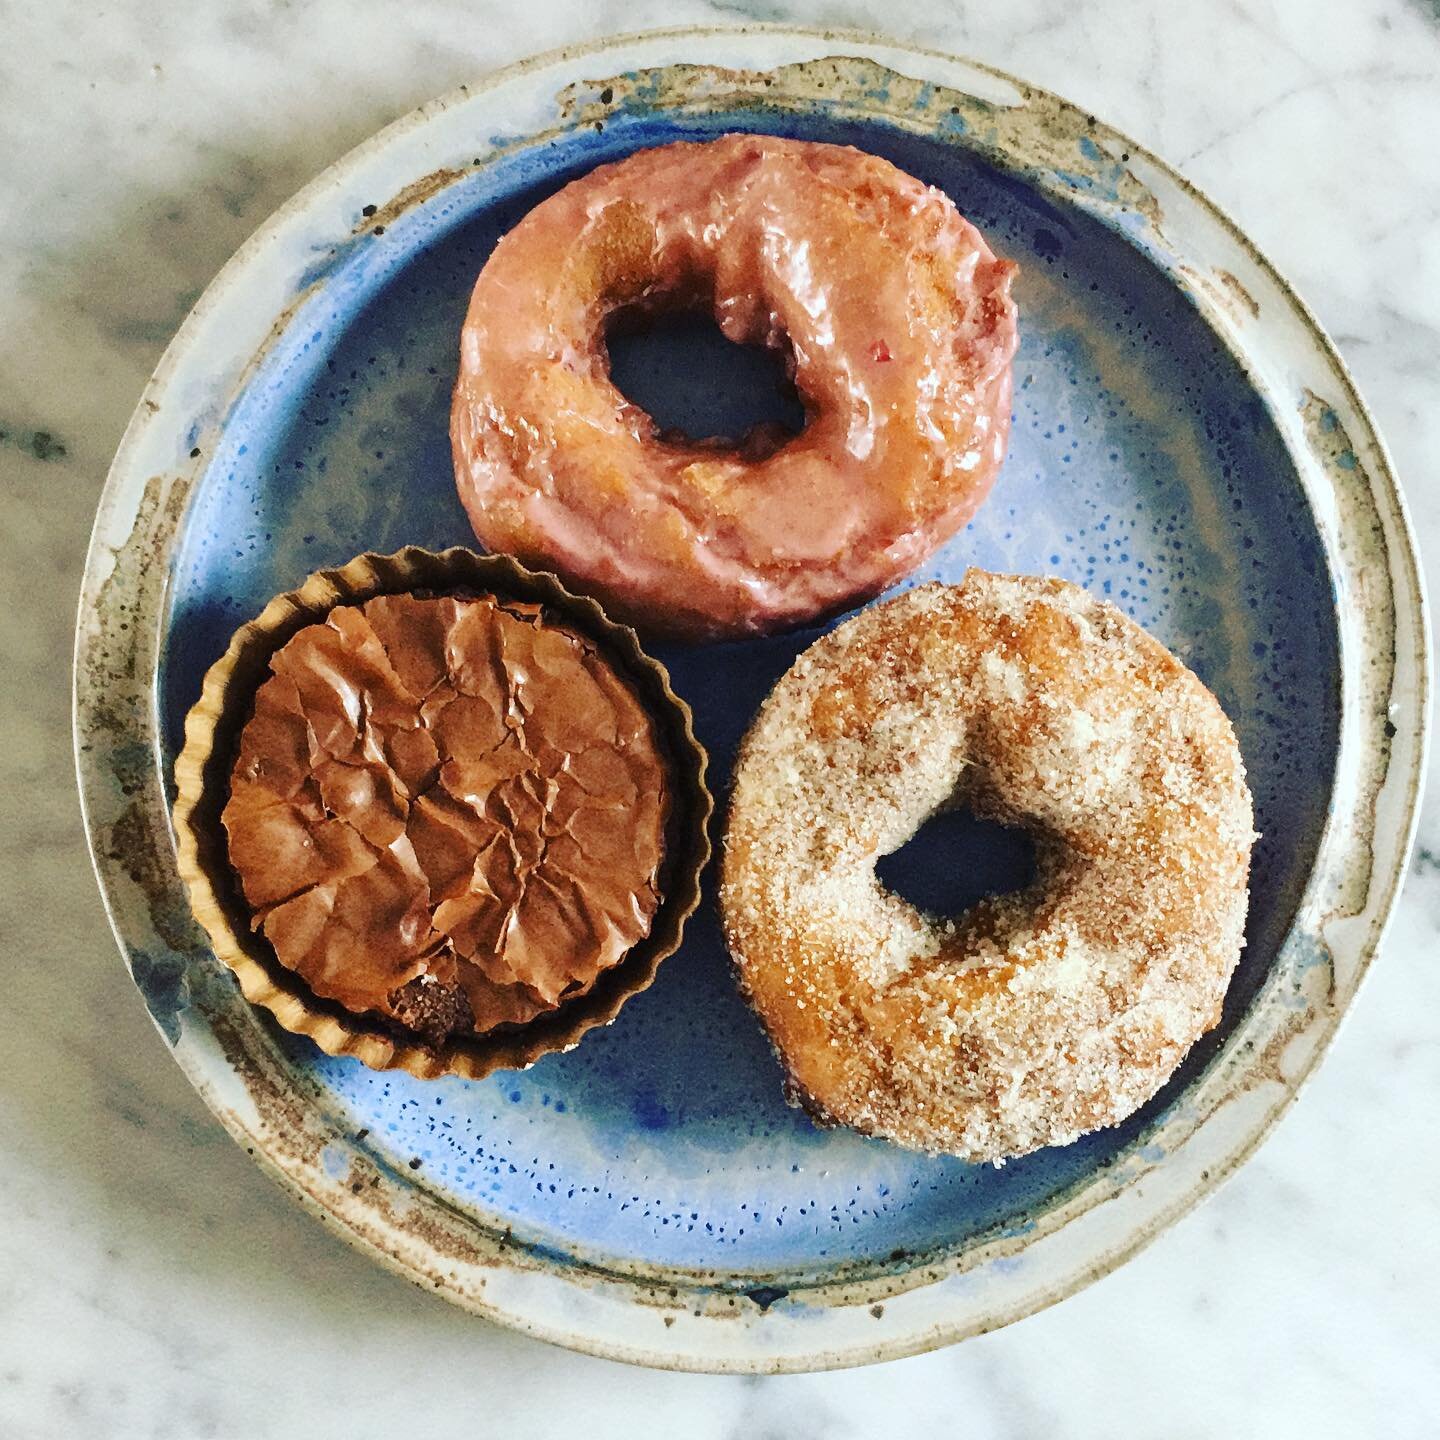 Sweet things are out in the world awaiting your arrival.  Find carbs @citymarketcoop @scoutandcompany @littlegordocreemeestand  Everyone has a different line up, but this is what we packed out: maple, cherry, lemon verbena &amp; black currant donuts 